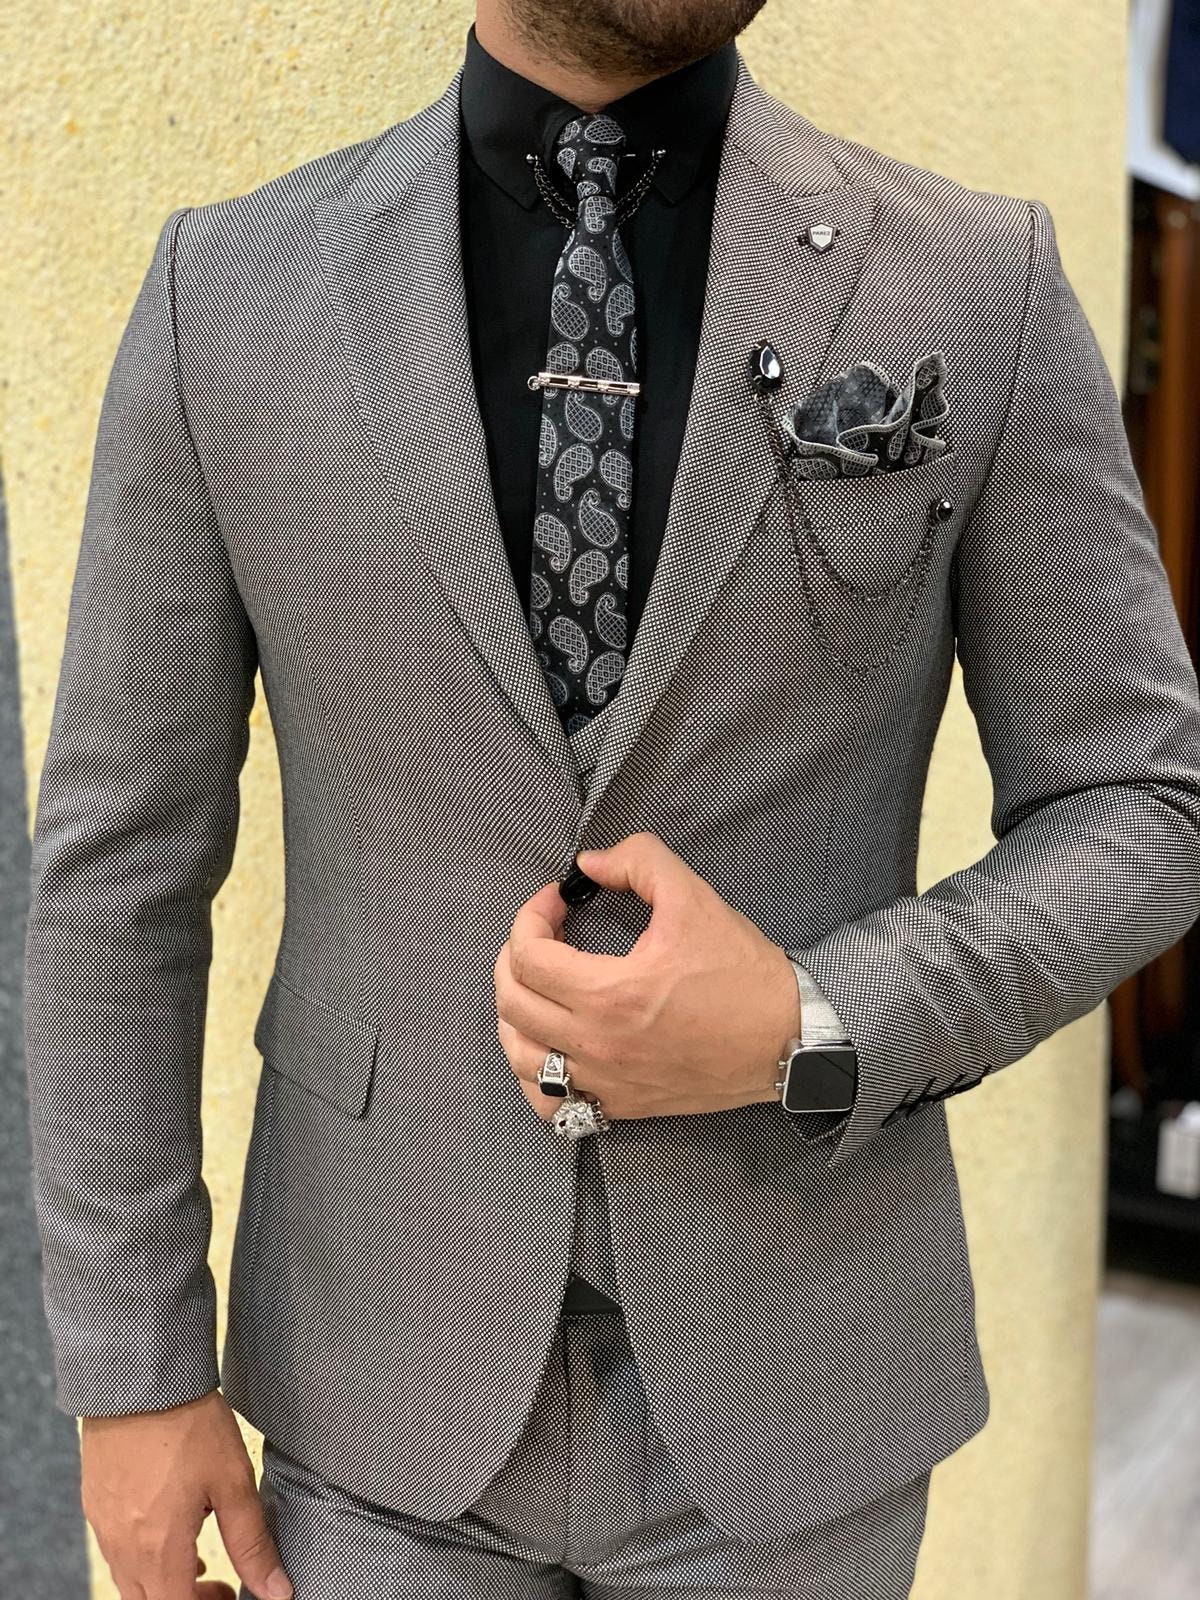 Men Suits Gray 3 Piece Slim Fit Two Button Wedding Groom Party | Etsy